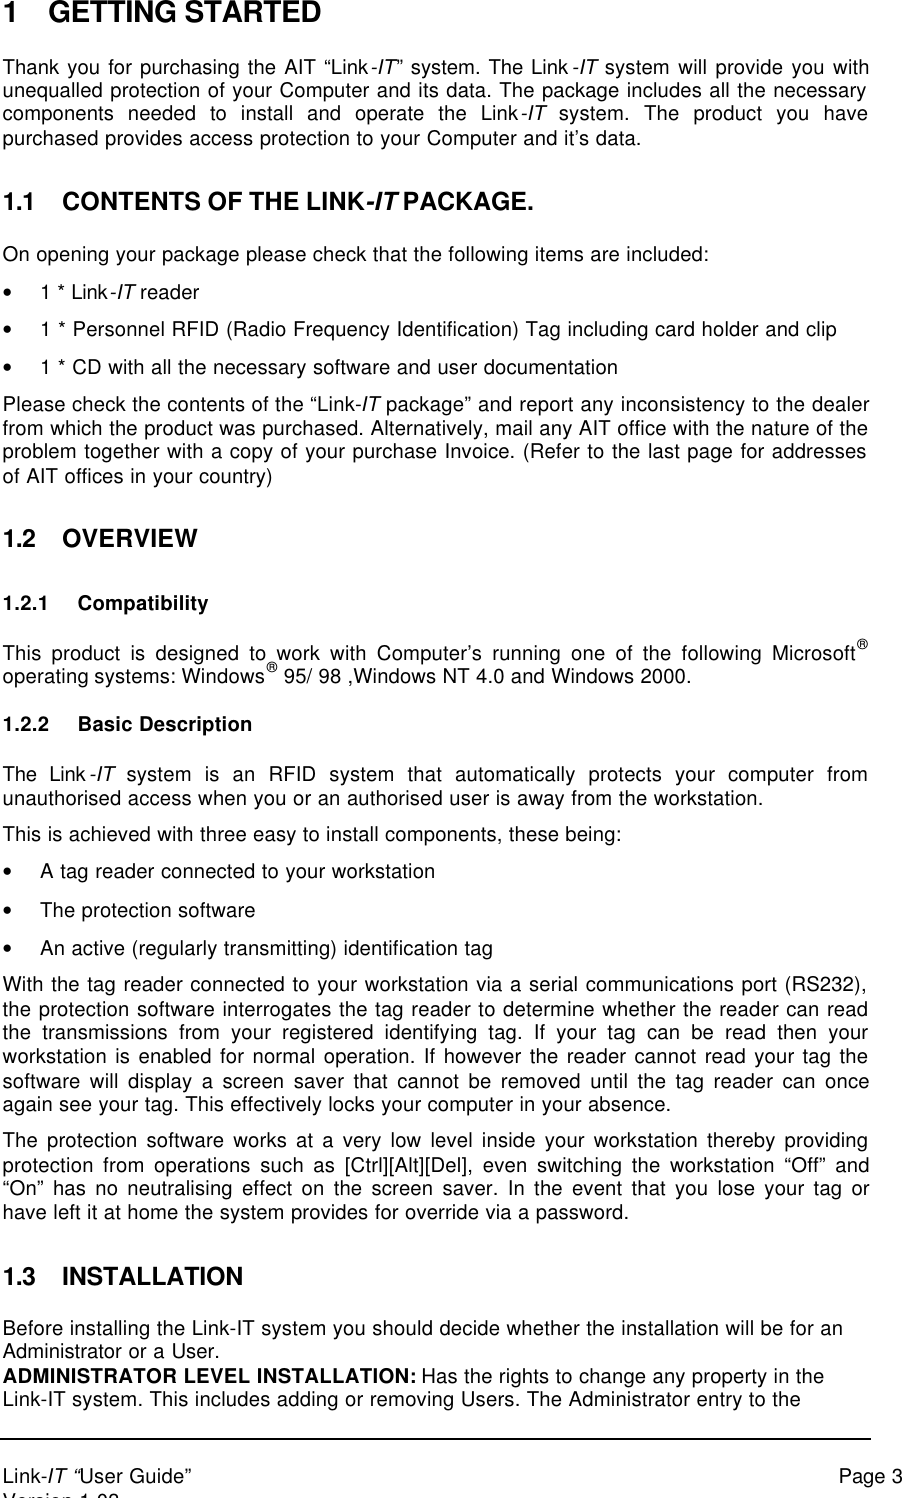 Link-IT “User Guide” Page 3Version 1.031 GETTING STARTEDThank you for purchasing the AIT “Link-IT” system. The Link-IT system will provide you withunequalled protection of your Computer and its data. The package includes all the necessarycomponents needed to install and operate the Link-IT system. The product you havepurchased provides access protection to your Computer and it’s data.1.1 CONTENTS OF THE LINK-IT PACKAGE.On opening your package please check that the following items are included:• 1 * Link-IT reader• 1 * Personnel RFID (Radio Frequency Identification) Tag including card holder and clip• 1 * CD with all the necessary software and user documentationPlease check the contents of the “Link-IT package” and report any inconsistency to the dealerfrom which the product was purchased. Alternatively, mail any AIT office with the nature of theproblem together with a copy of your purchase Invoice. (Refer to the last page for addressesof AIT offices in your country)1.2 OVERVIEW1.2.1 CompatibilityThis product is designed to work with Computer’s running one of the following Microsoft®operating systems: Windows® 95/ 98 ,Windows NT 4.0 and Windows 2000.1.2.2 Basic DescriptionThe Link-IT system is an RFID system that automatically protects your computer fromunauthorised access when you or an authorised user is away from the workstation.This is achieved with three easy to install components, these being:• A tag reader connected to your workstation• The protection software• An active (regularly transmitting) identification tagWith the tag reader connected to your workstation via a serial communications port (RS232),the protection software interrogates the tag reader to determine whether the reader can readthe transmissions from your registered identifying tag. If your tag can be read then yourworkstation is enabled for normal operation. If however the reader cannot read your tag thesoftware will display a screen saver that cannot be removed until the tag reader can onceagain see your tag. This effectively locks your computer in your absence.The protection software works at a very low level inside your workstation thereby providingprotection from operations such as [Ctrl][Alt][Del], even switching the workstation “Off” and“On” has no neutralising effect on the screen saver. In the event that you lose your tag orhave left it at home the system provides for override via a password.1.3 INSTALLATIONBefore installing the Link-IT system you should decide whether the installation will be for anAdministrator or a User.ADMINISTRATOR LEVEL INSTALLATION: Has the rights to change any property in theLink-IT system. This includes adding or removing Users. The Administrator entry to the